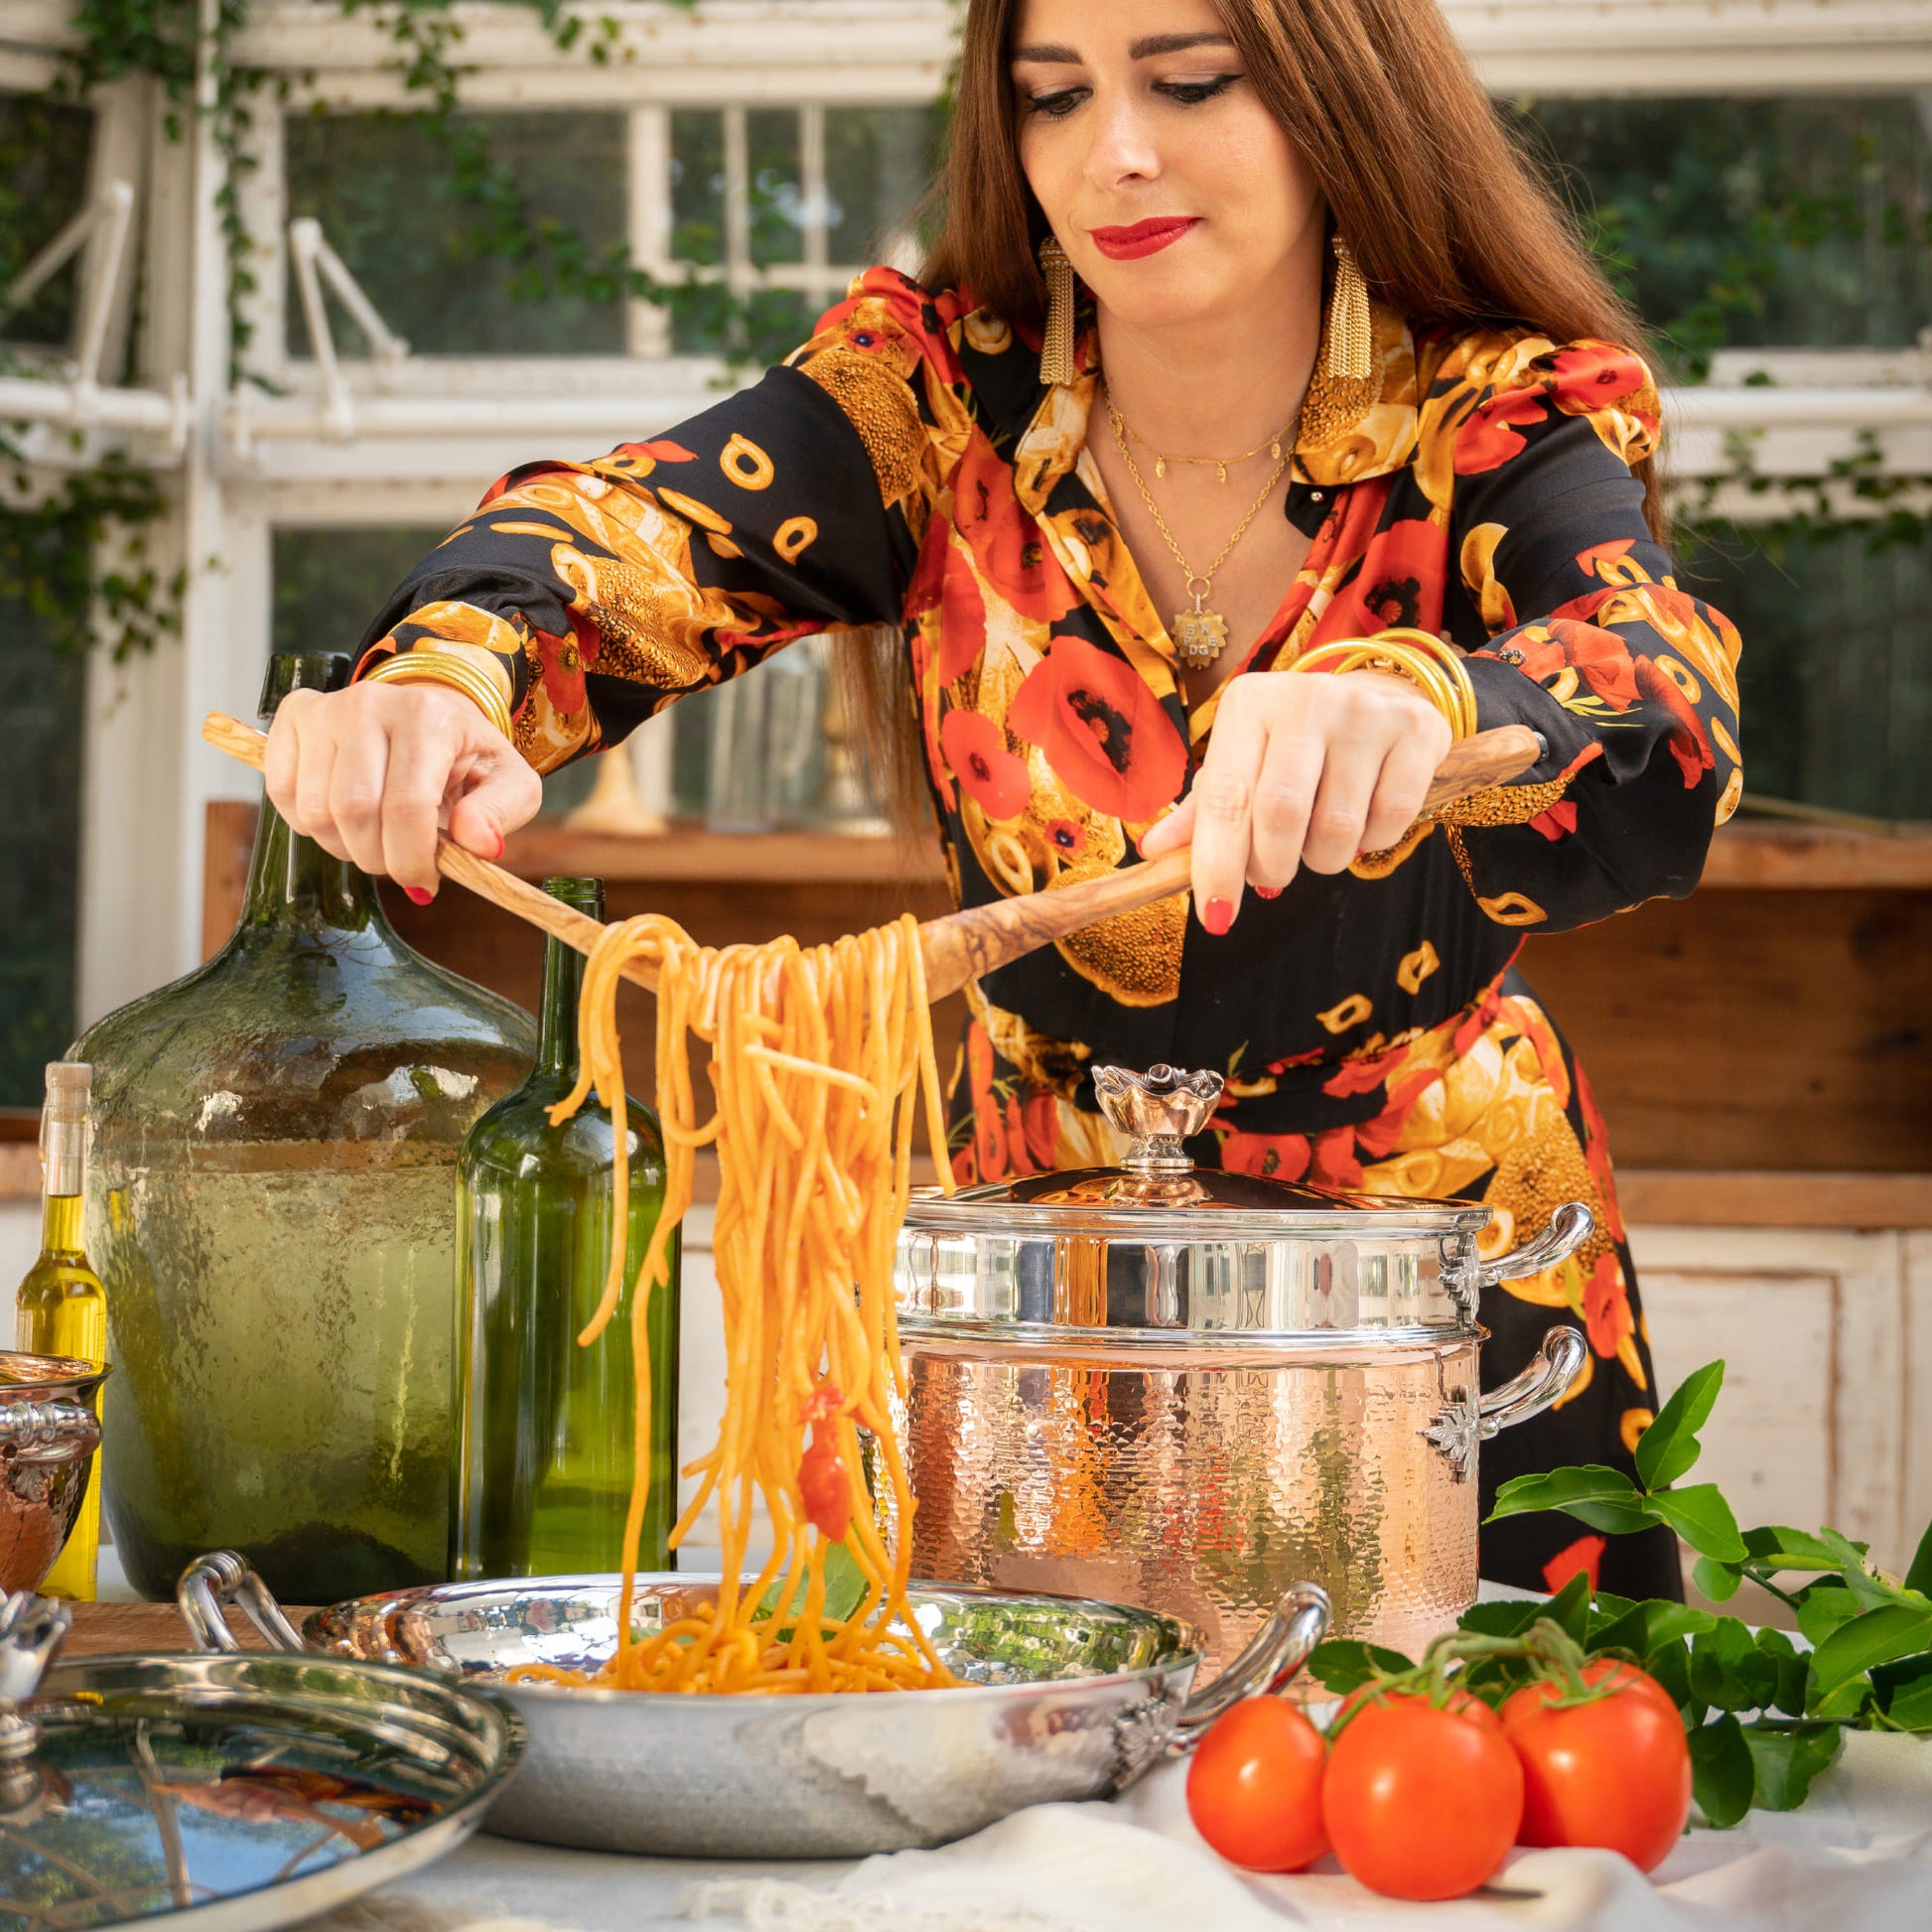 Nadia Caterina Munno, aka The Pasta Queen, presenting spaghetti with cherry tomatoes and basil, made in her Stella, the serving frying pan part of The Pasta Queen by Ruffoni Collection of hammered copper and stainless steel cookware